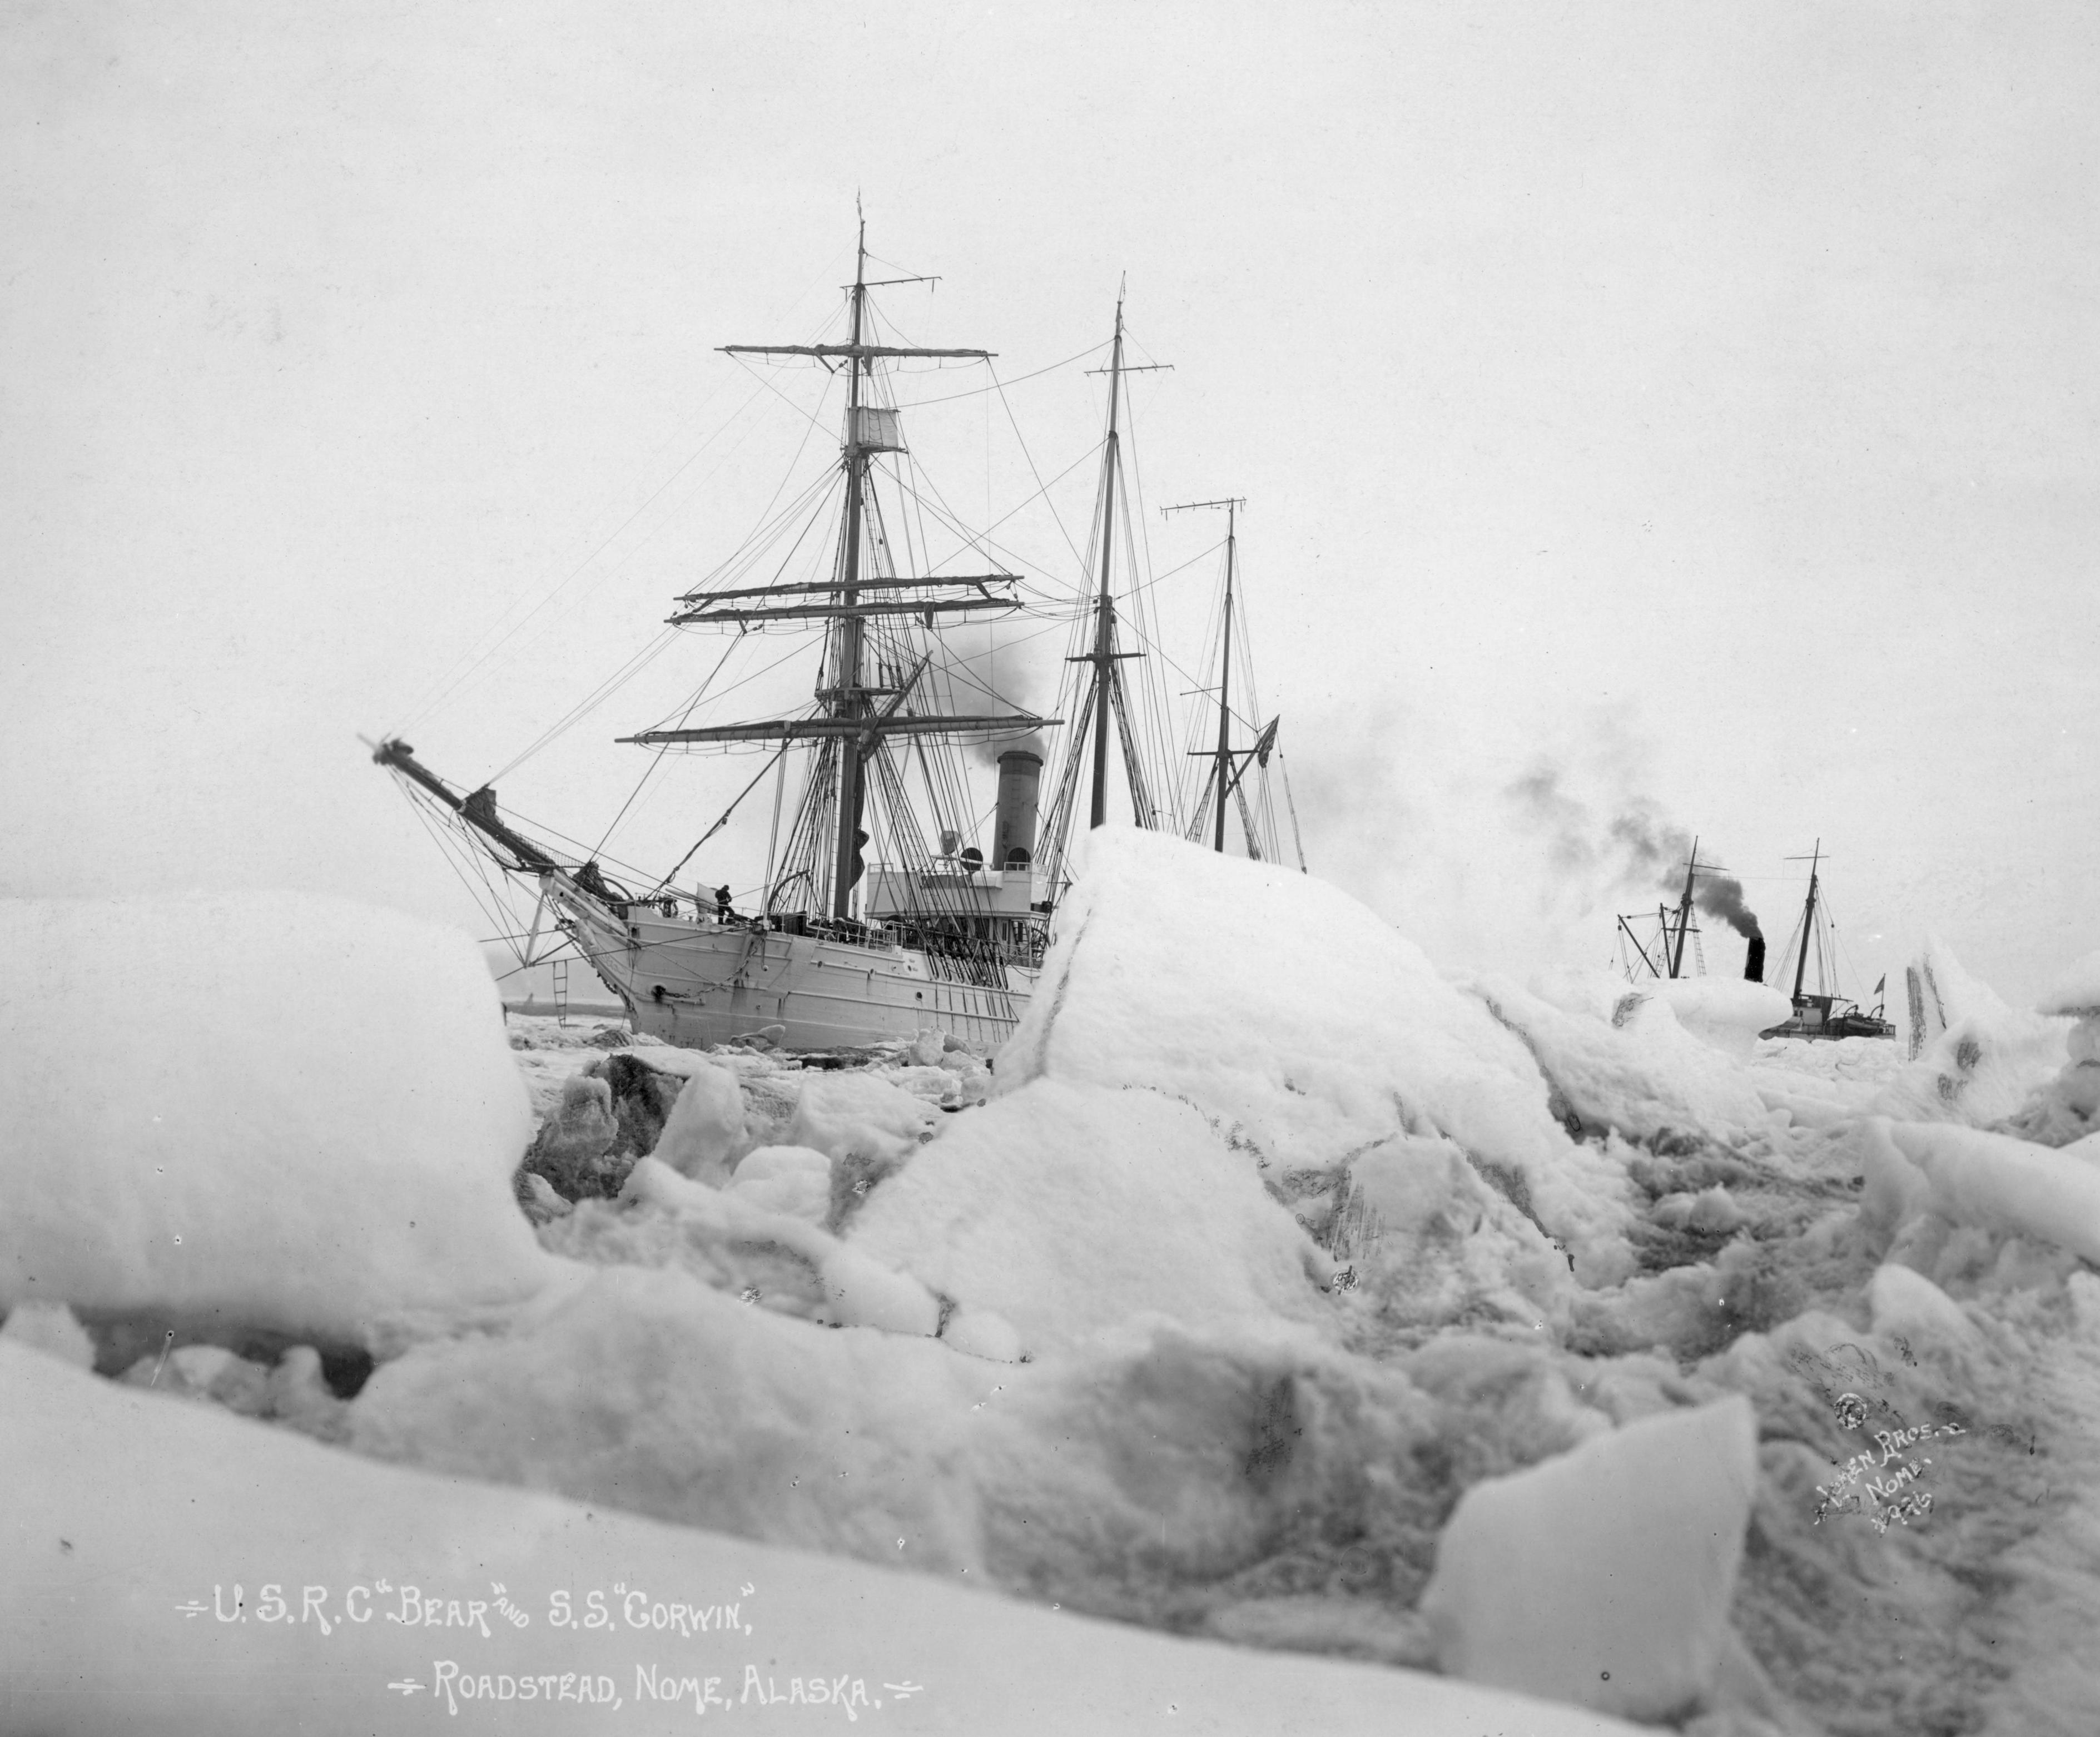 <p>The Navy did not begin exploring the Arctic before 1836, but the tradition is believed to have become more formalized after World War II when the Navy started regularly exploring the region.</p><p><span>It wasn't until 1851 that a ship successfully crossed the Arctic Circle as part of what is now known as the First Grinnell Expedition.</span></p><p><span>Henry Grinnell, an American merchant from New York, funded the expedition as part of a mission to find the lost Franklin expedition, a team of Royal Navy sailors who had set out six years prior and never returned.</span></p><p><span>The First Grinnell Expedition marked the first time the US Navy successfully navigated the Arctic, crossed the Arctic Circle, and returned to the US.</span></p><p><span>With the knowledge gained about land masses, sailing techniques, and maritime paths in the Arctic, many expeditions north would follow.</span></p>